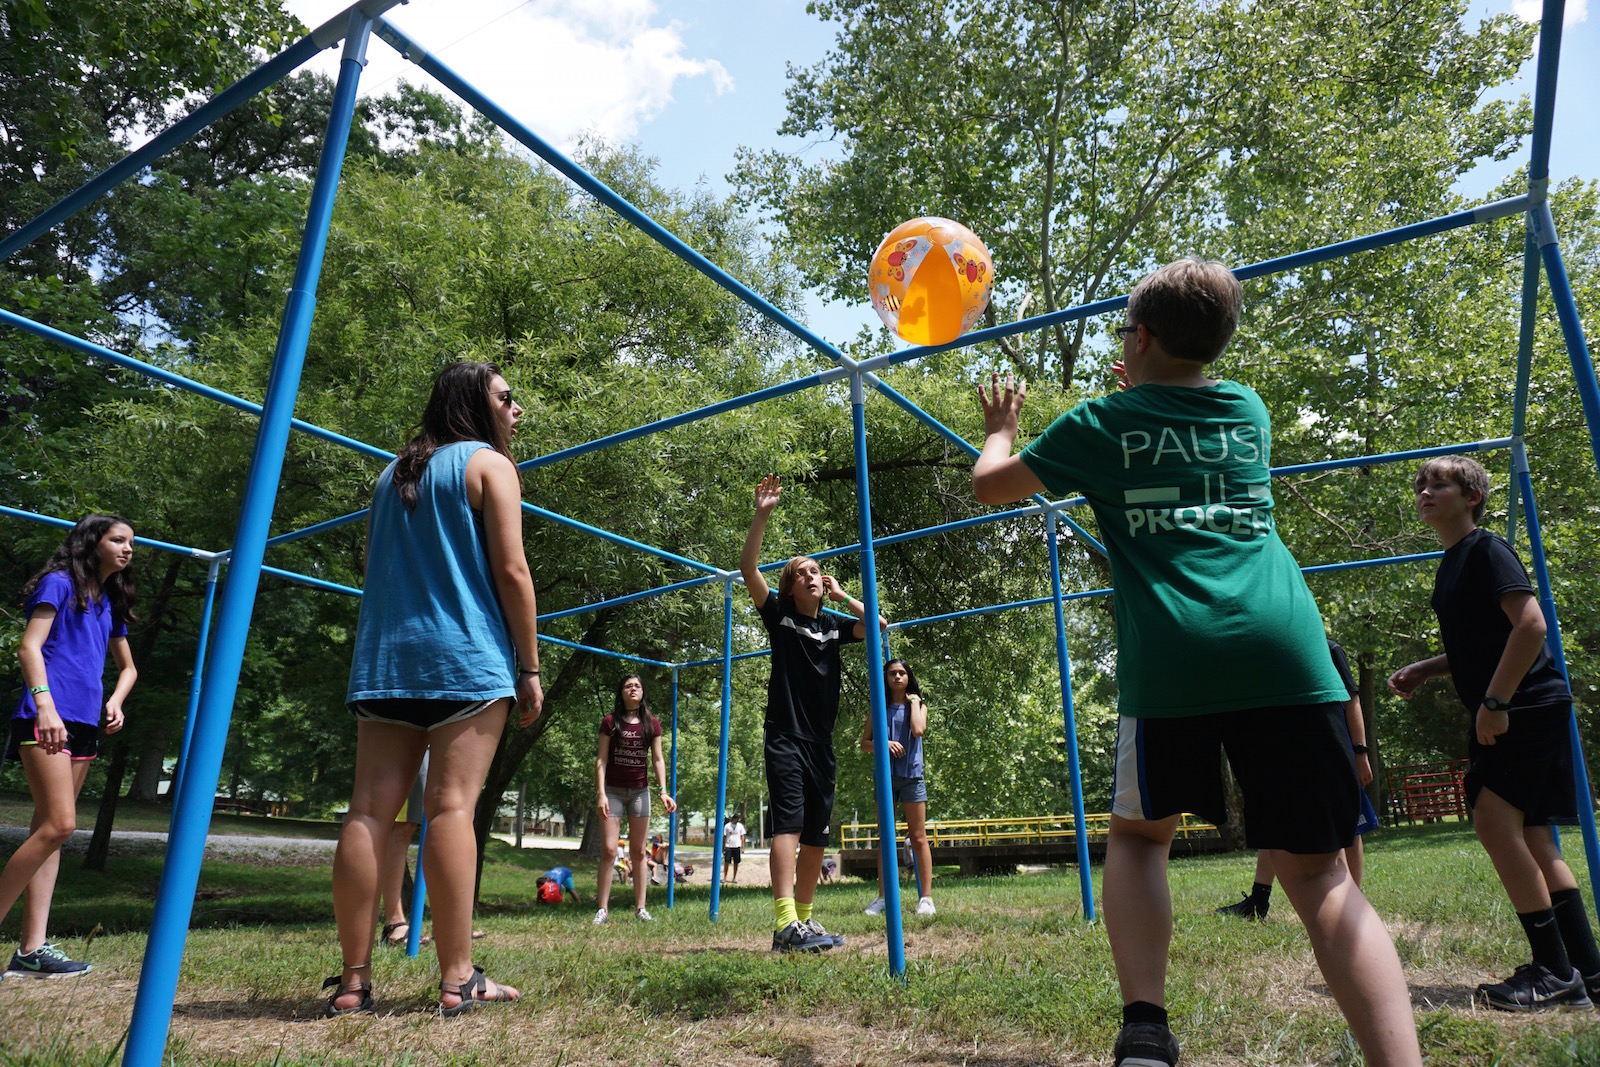  Middle School aged Summer Campers playing a game with an orange ball - NaCoMe Camp &amp; Conference Center 